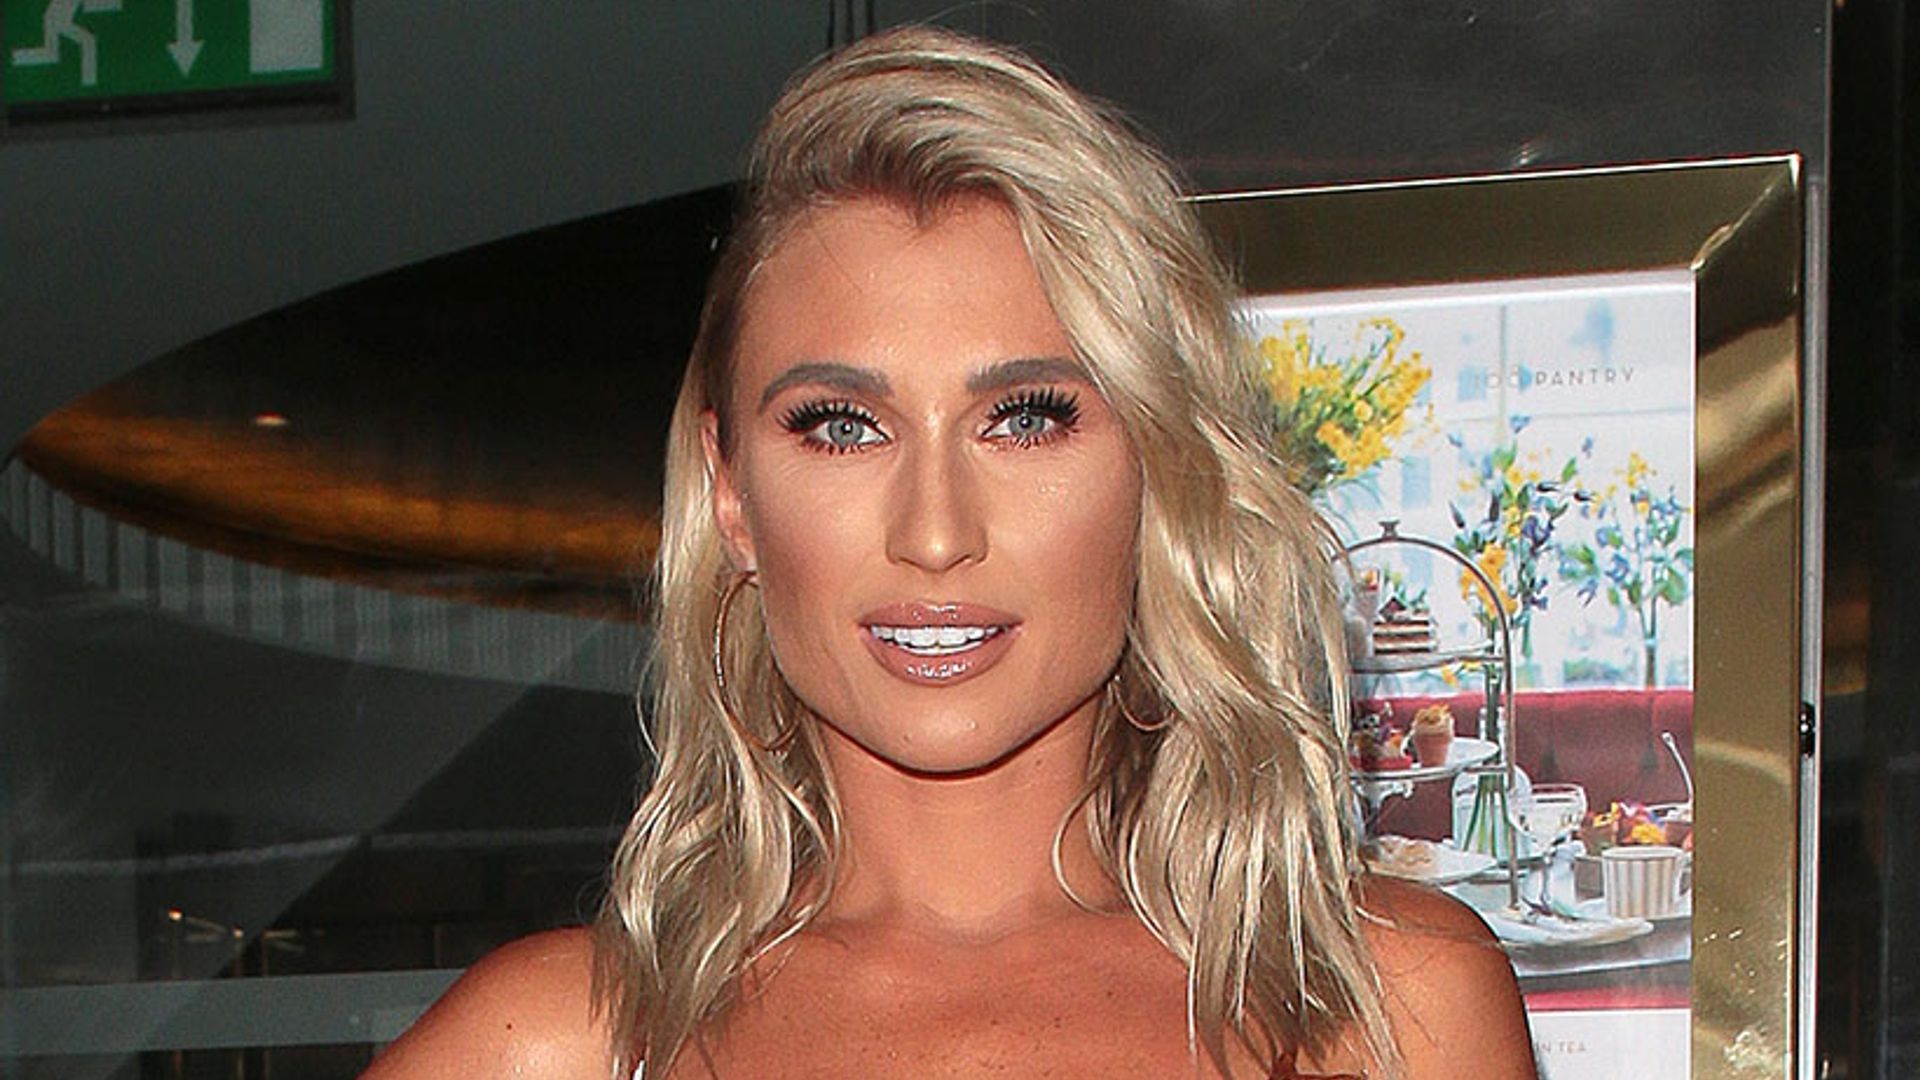 See where Billie Faiers and other stars get their children's school uniforms from